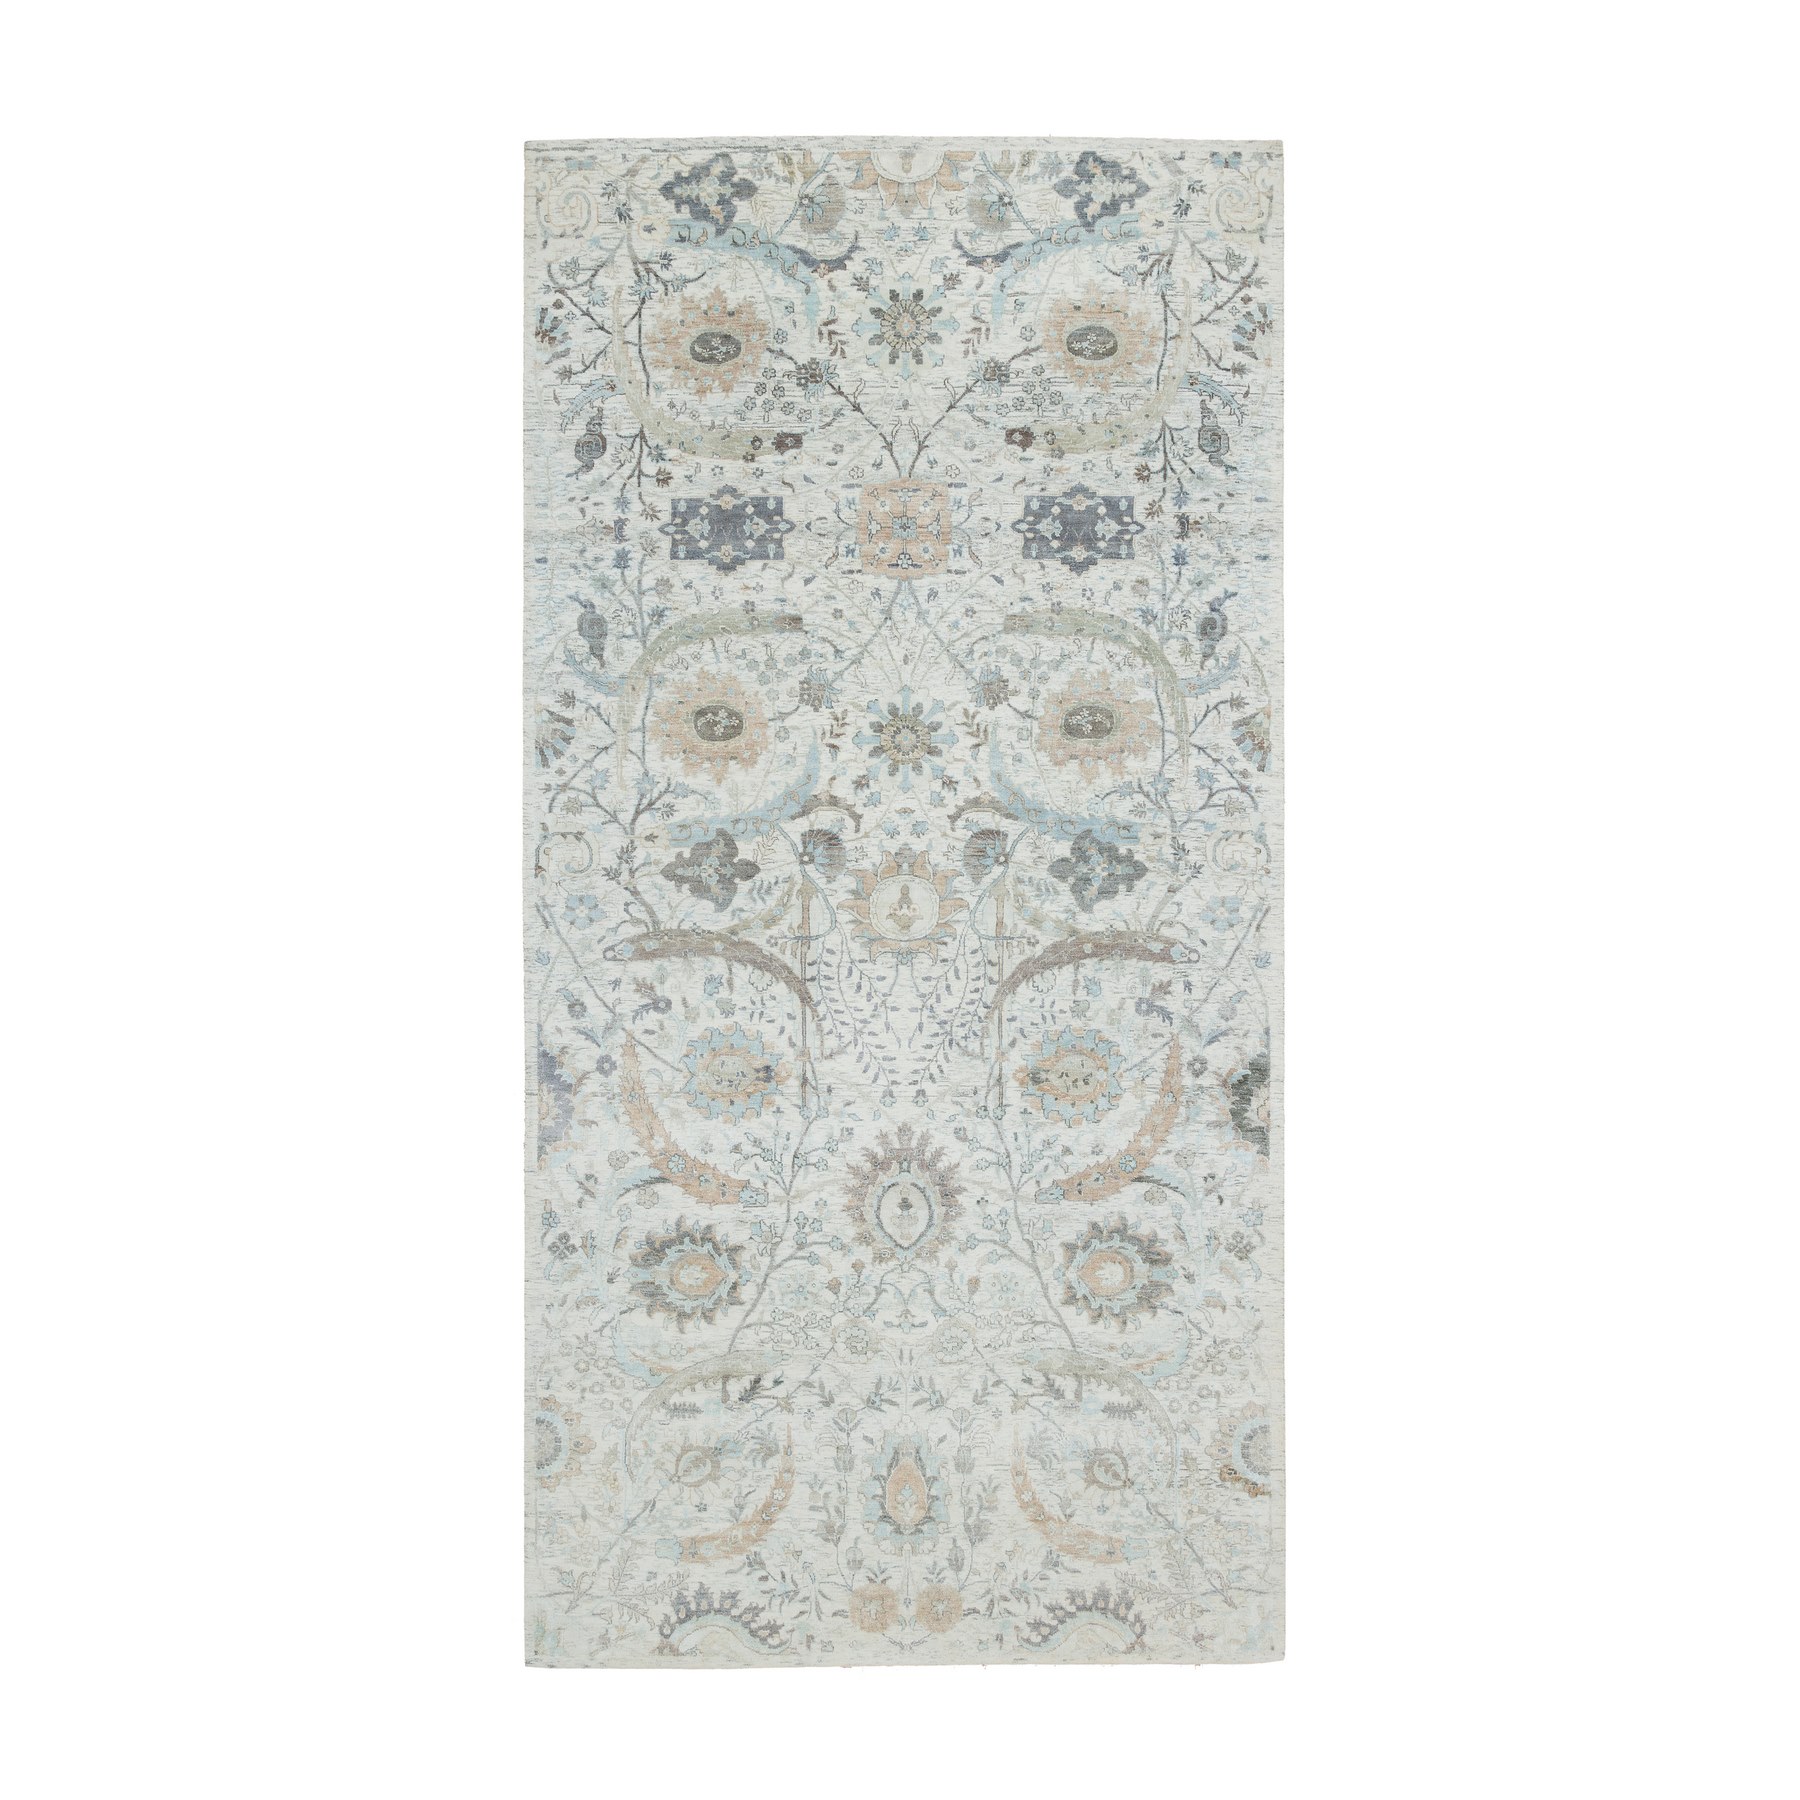  Silk Hand-Knotted Area Rug 6'1